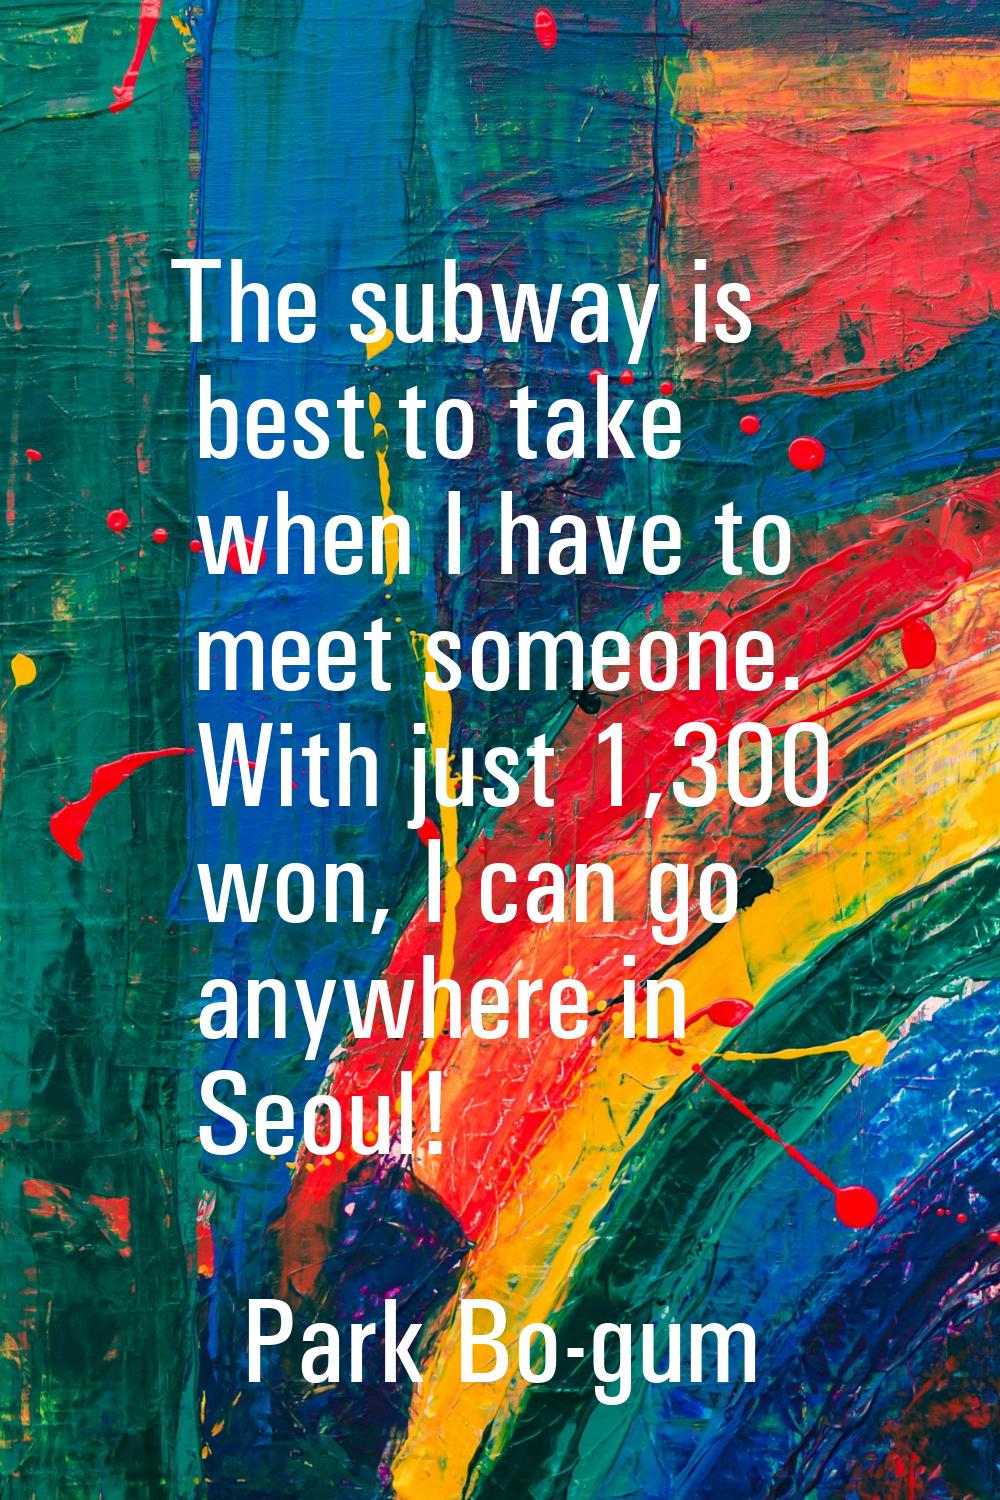 The subway is best to take when I have to meet someone. With just 1,300 won, I can go anywhere in S